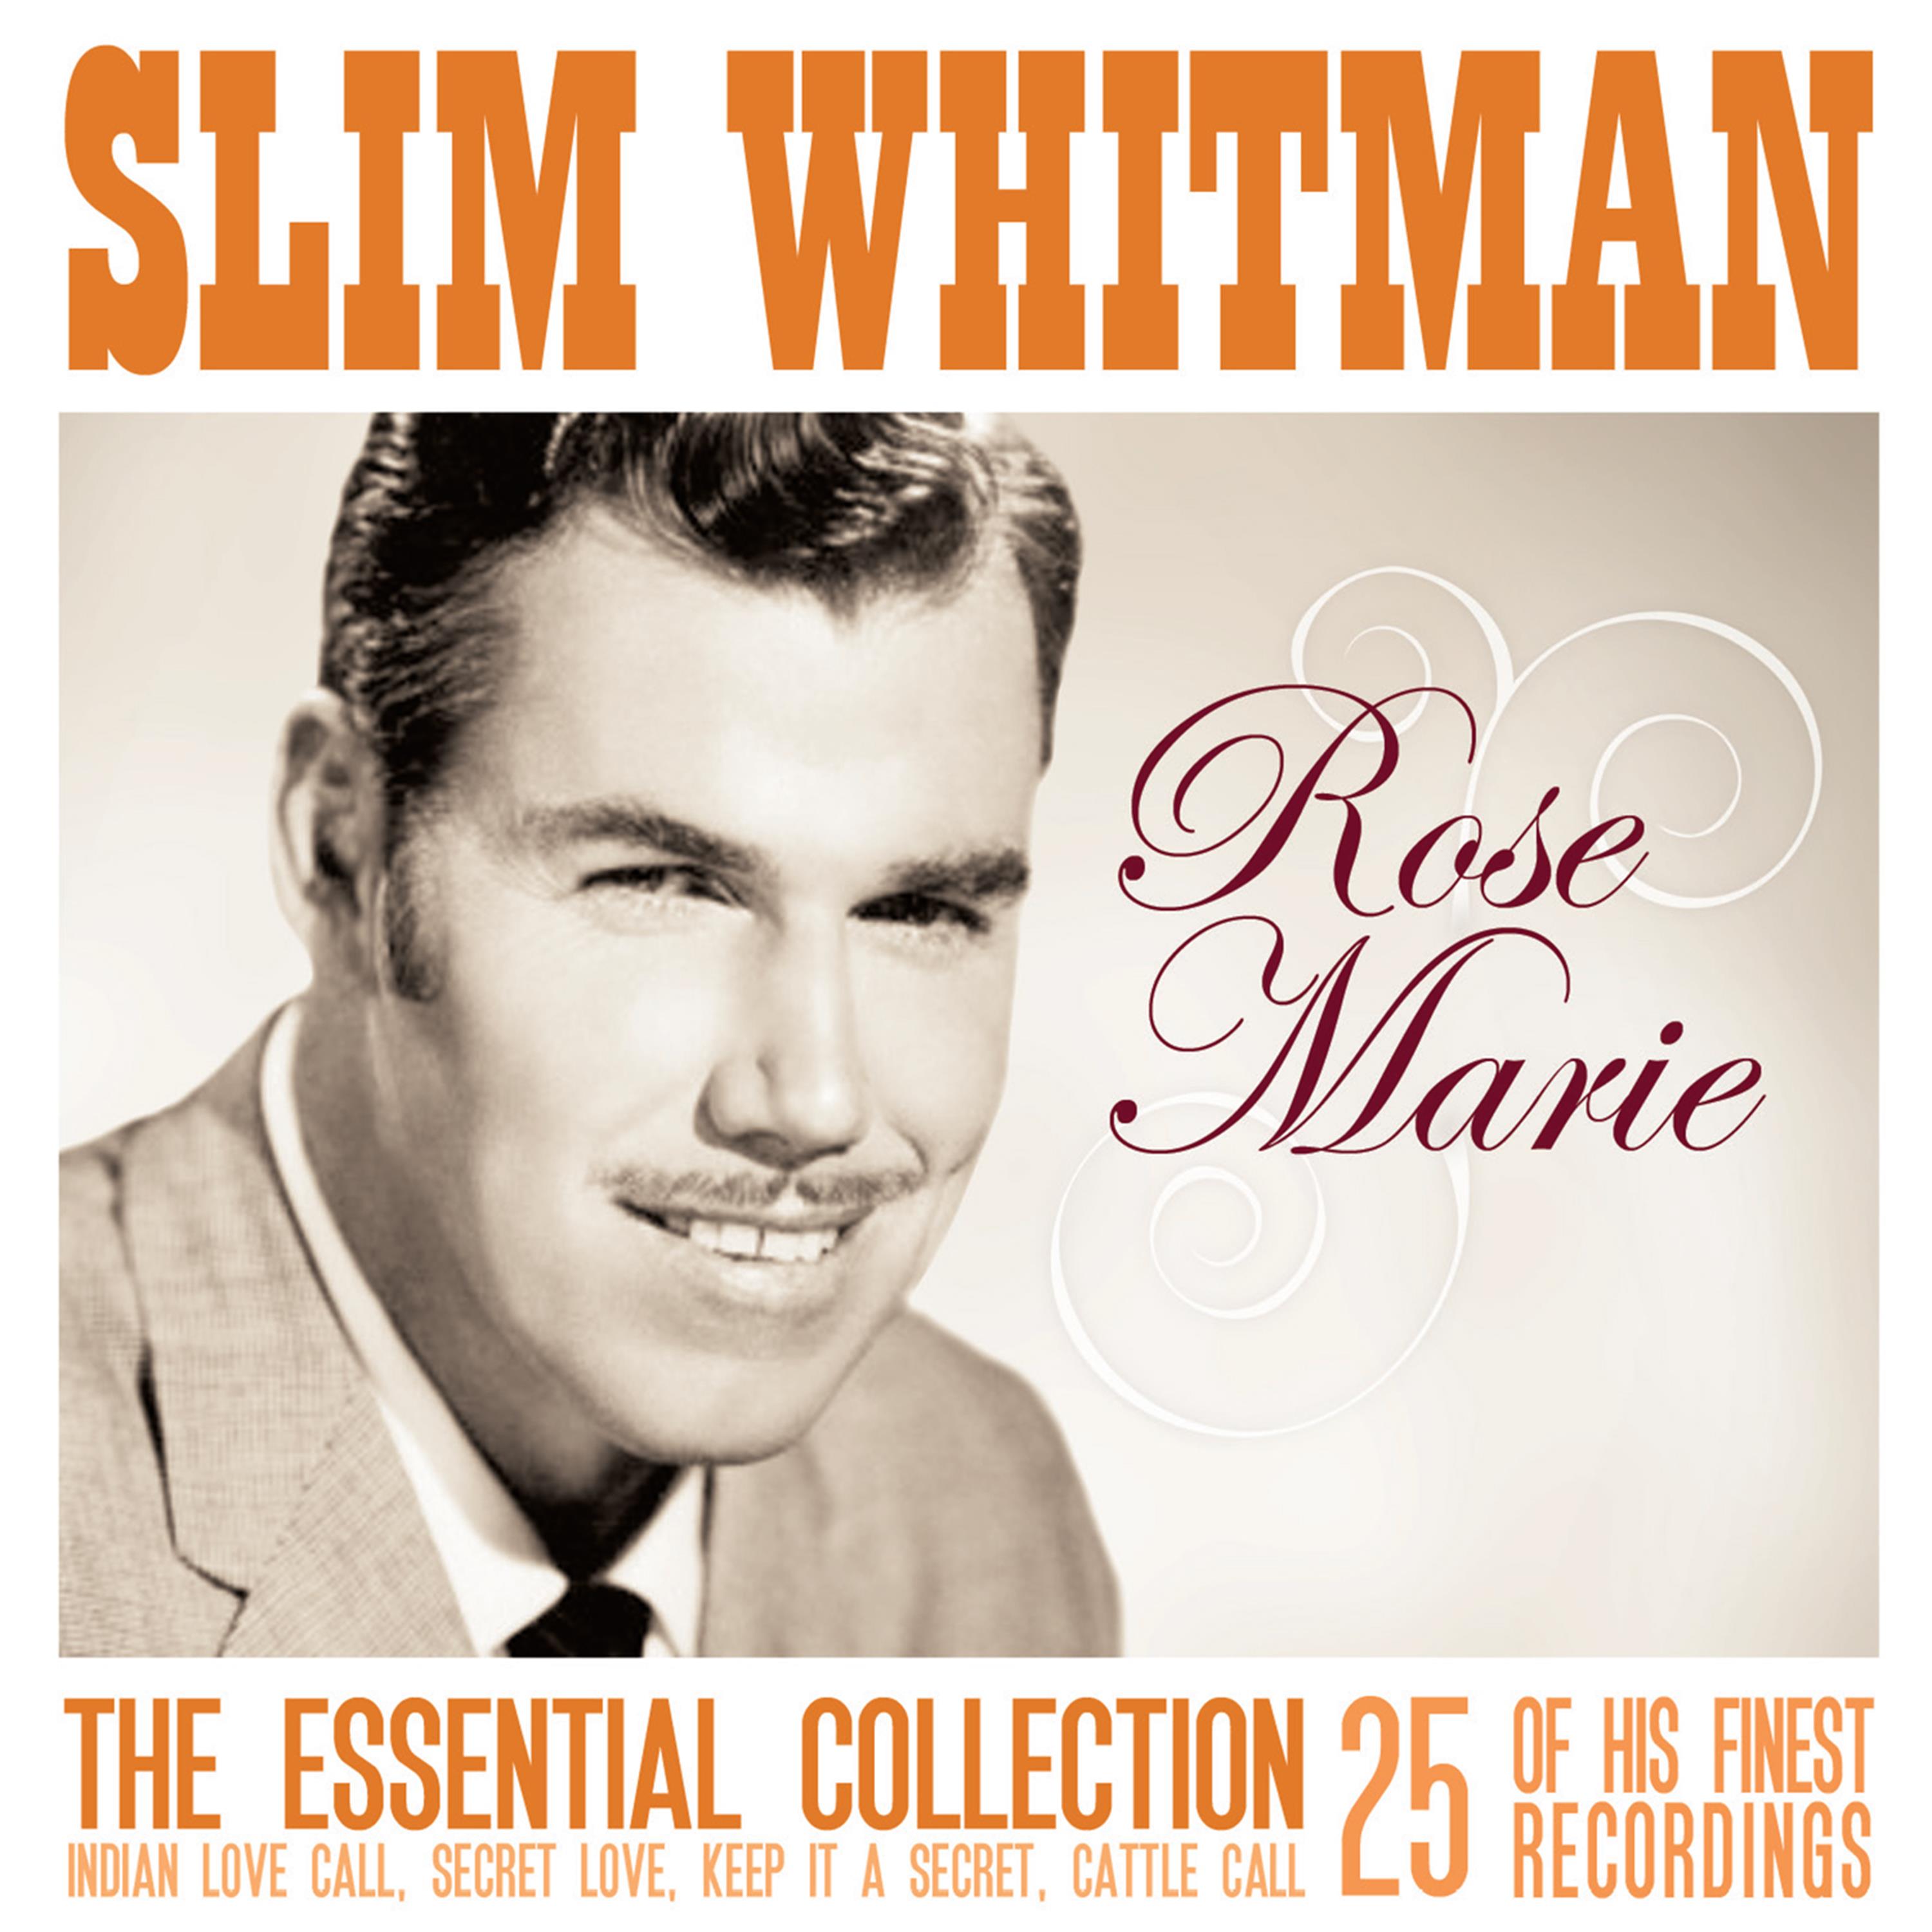 Rose Marie: The Essential Slim Whitman - 25 of His Finest Recordings